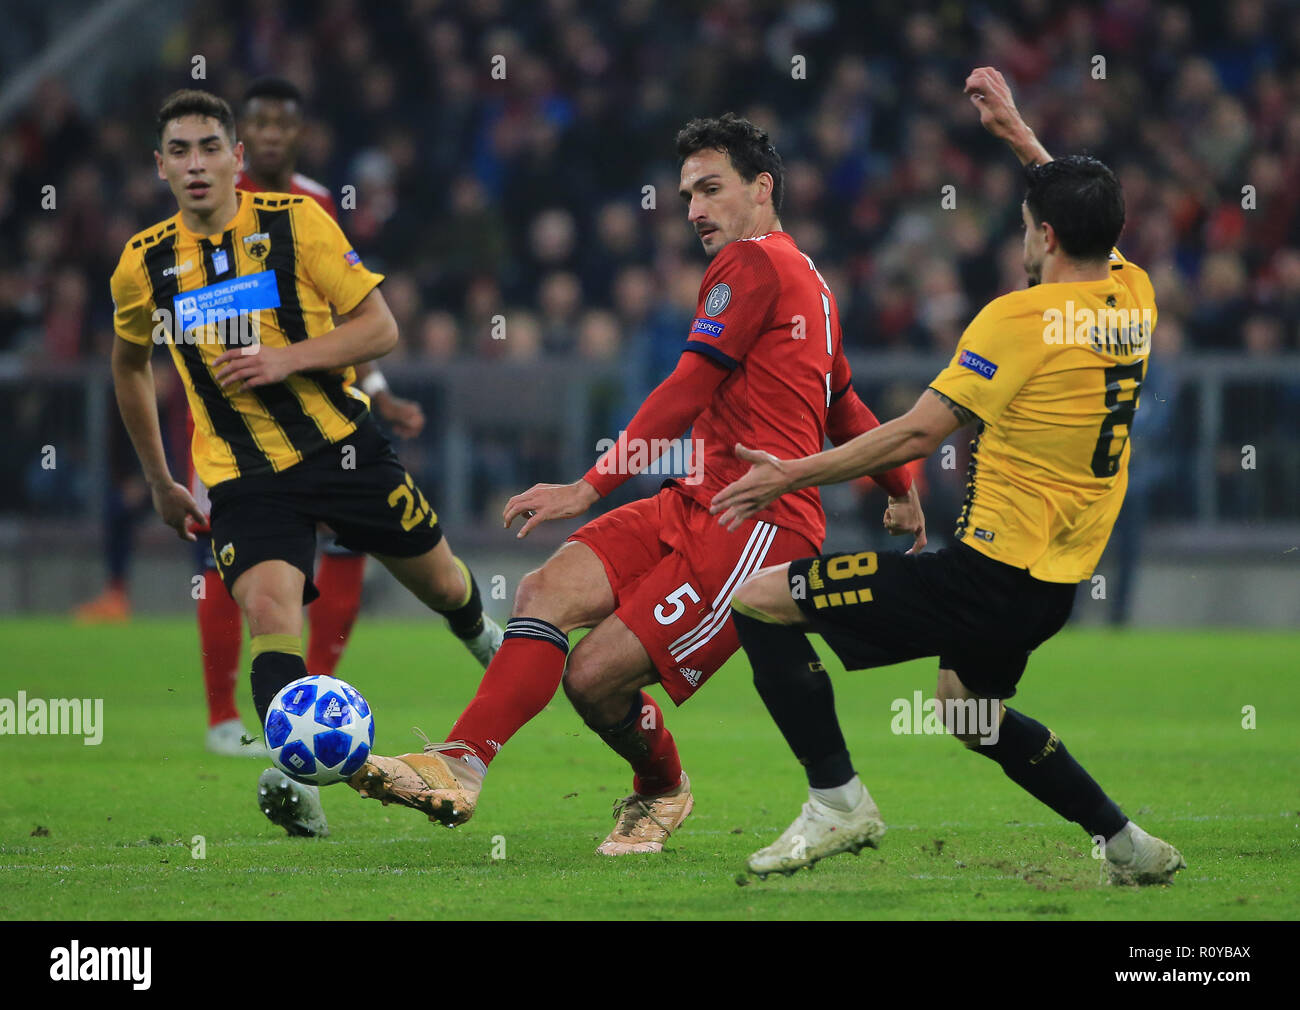 Munich, Germany. 7th Nov, 2018. Bayern Munich's Mats Hummels (2nd R) vies  with AEK Athen's Andre Simoes (1st R) during a 4th round match of group E  in the UEFA Champions League